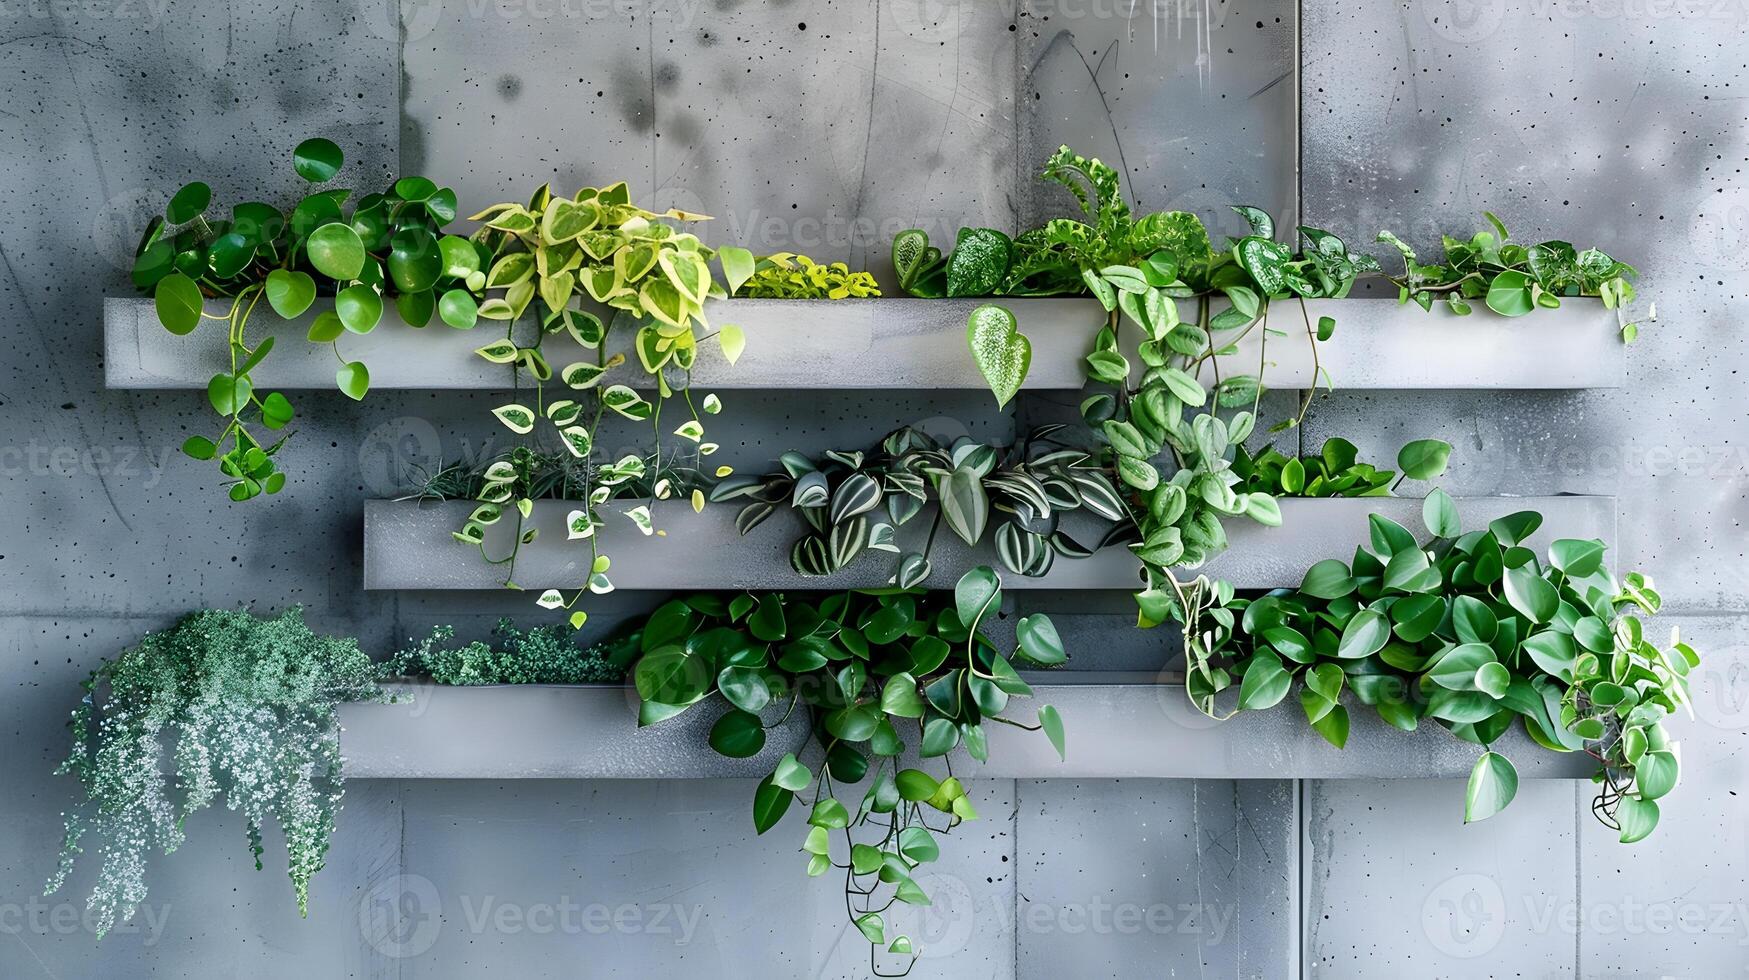 Lush and Thriving Vertical Garden Wall with Diverse Botanical Foliage for Modern and Eco-Friendly Interior or Exterior Design photo